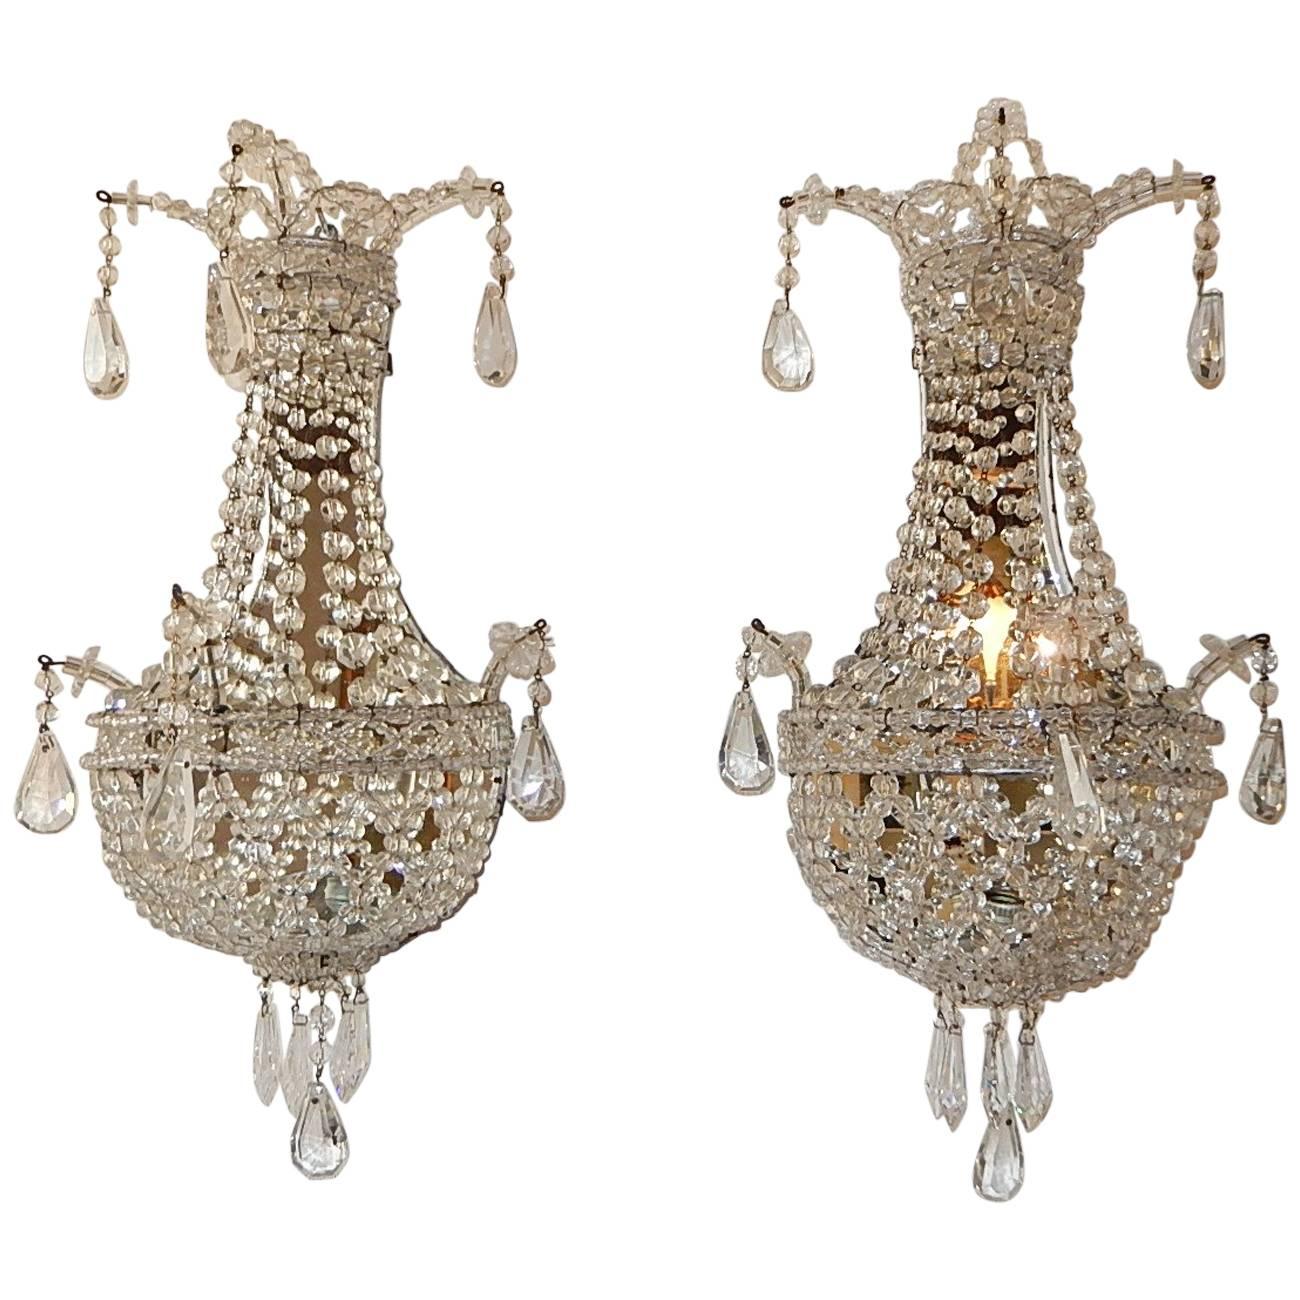 Crystal Beaded Basket with Prisms and Mirrors Sconces